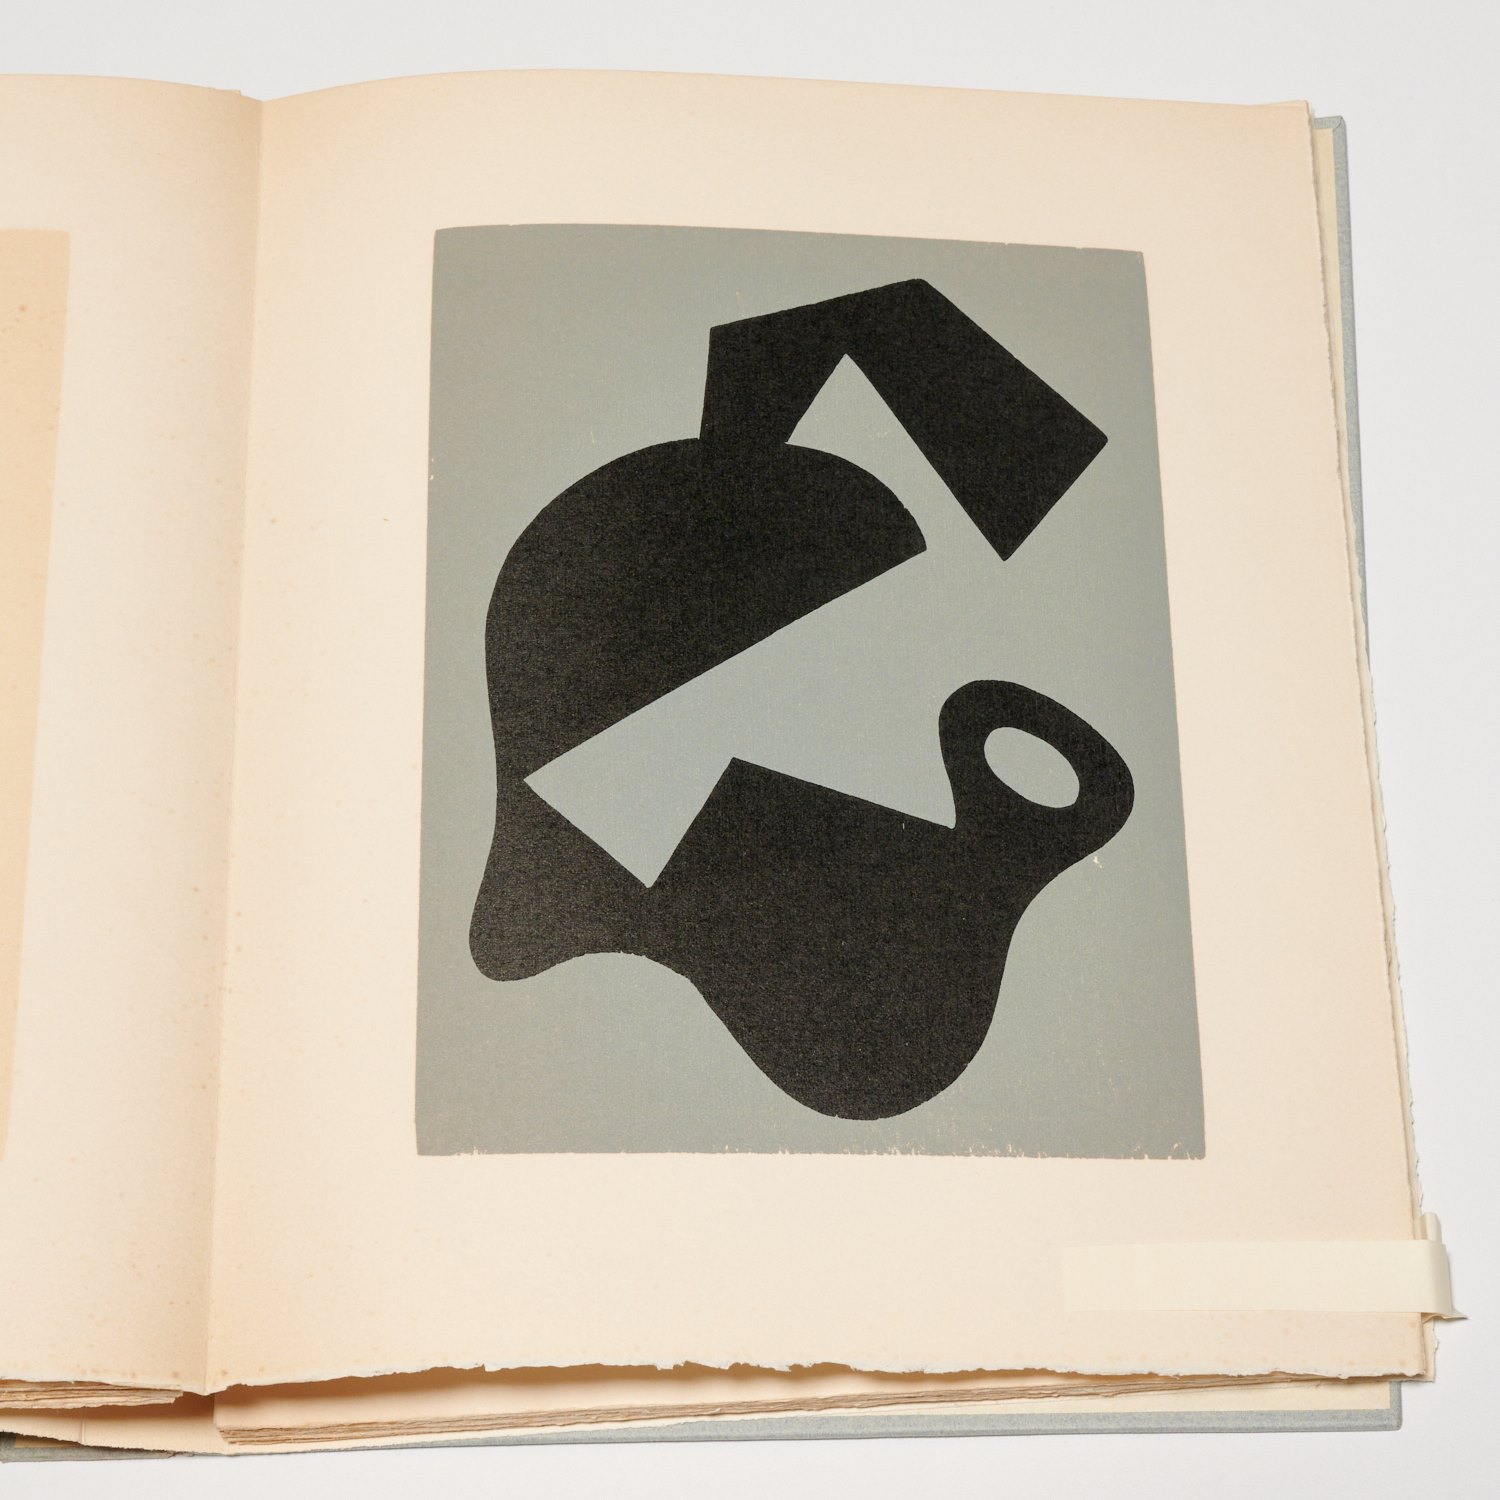 JEAN ARP, DREAMS AND PROJECTS,